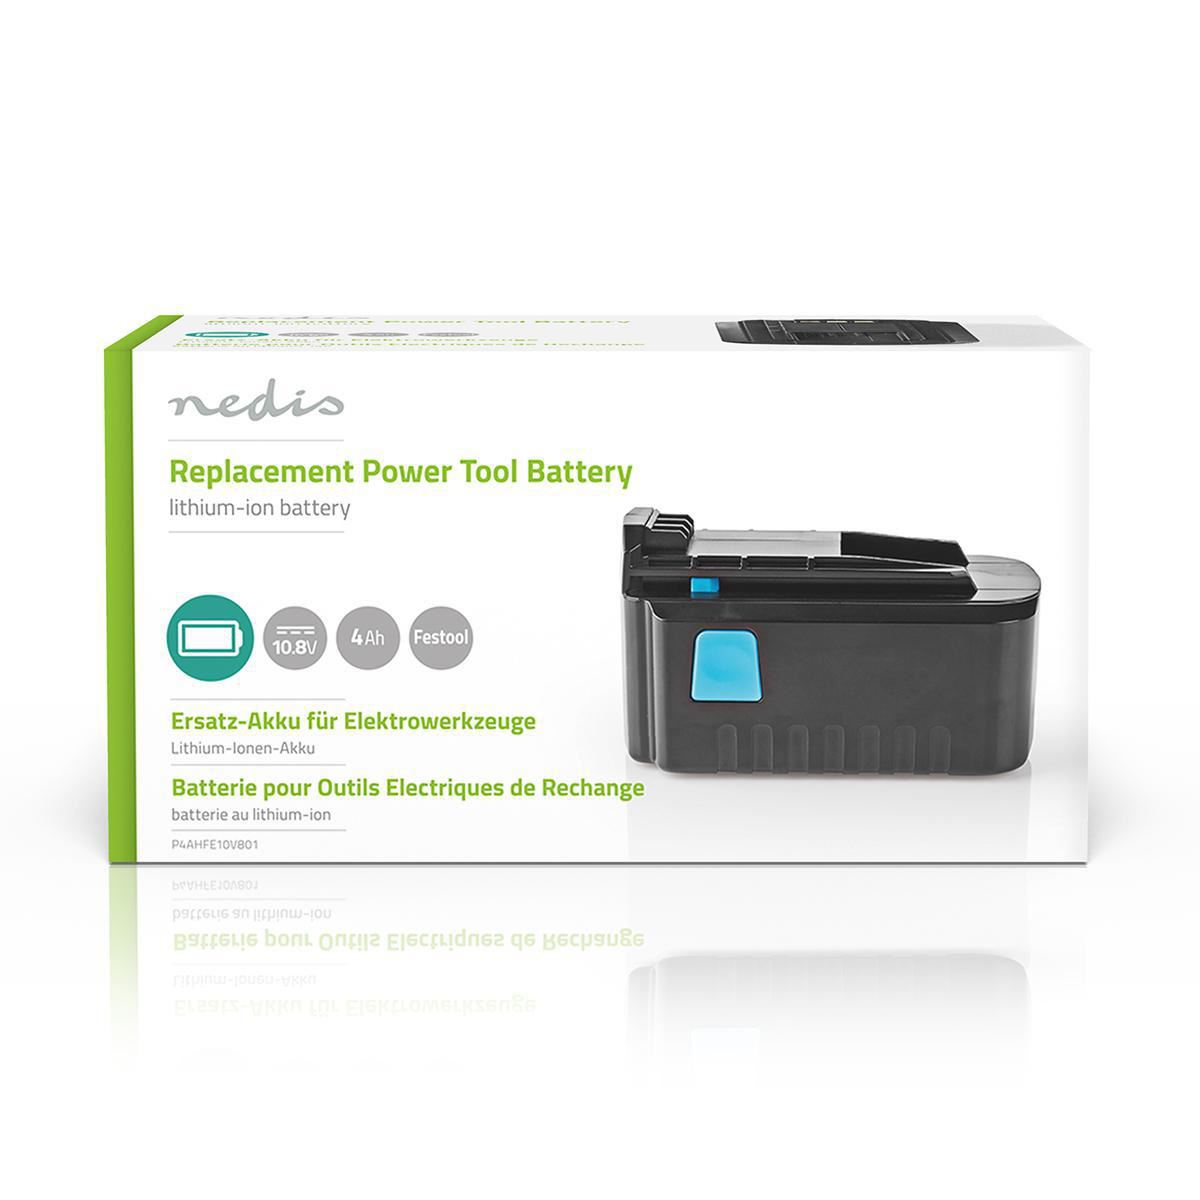 Nedis Power Tool Battery Li-Ion 10.8V 4Ah 43.2Wh Replacement for Festool